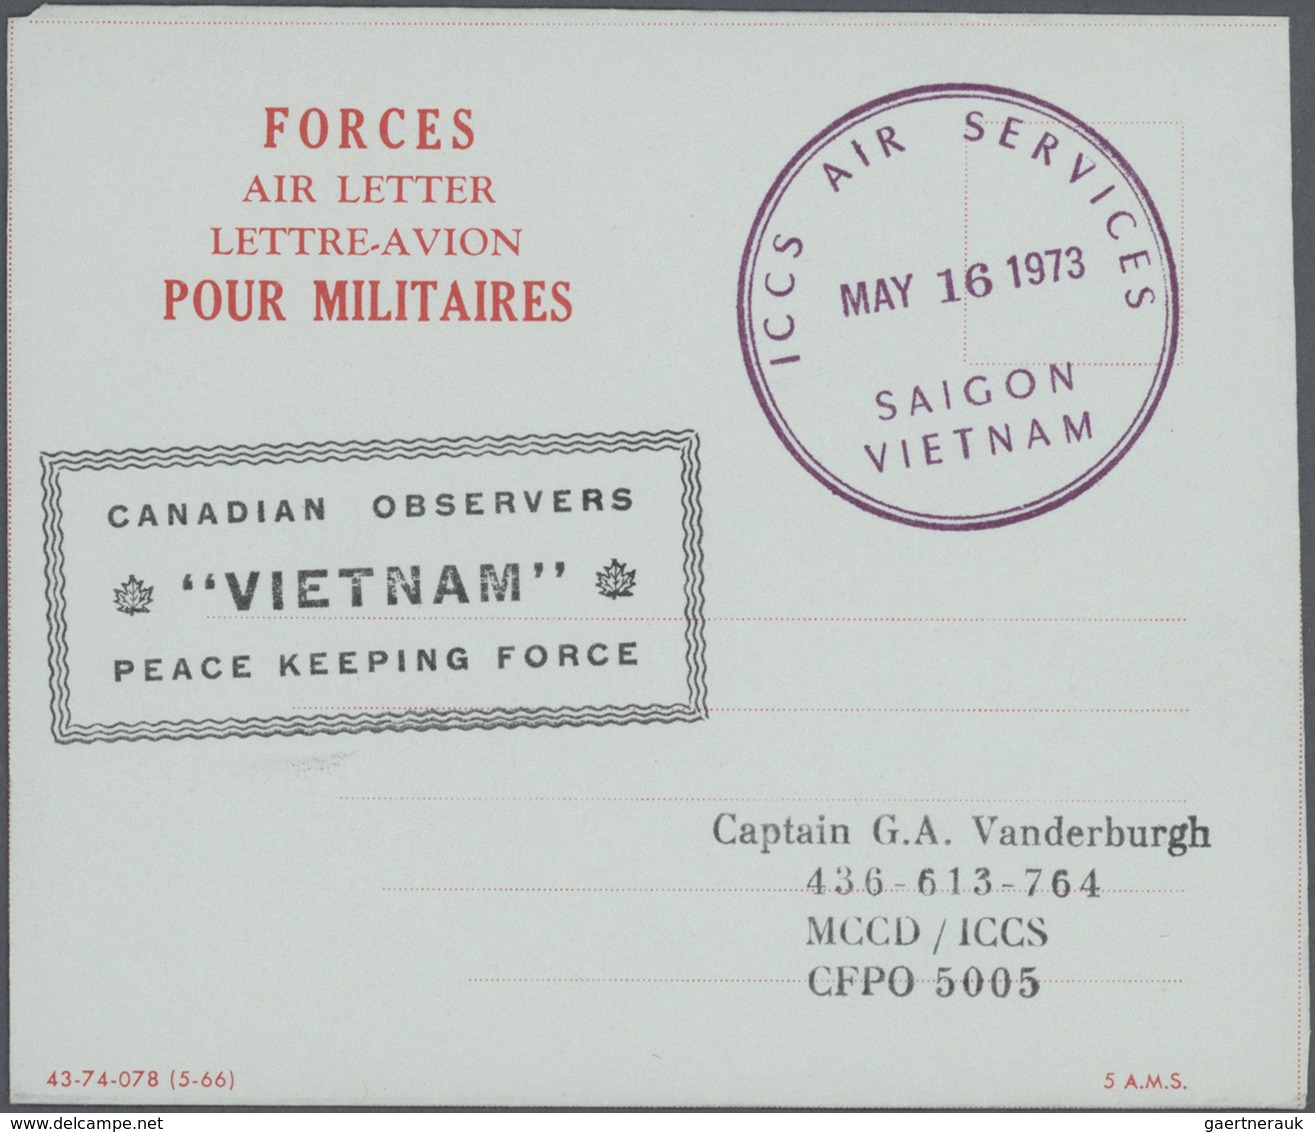 Vietnam-Süd (1951-1975): 1955/1973, ex-1 all military airletters (Quan Buu) in blue mint (15) or use